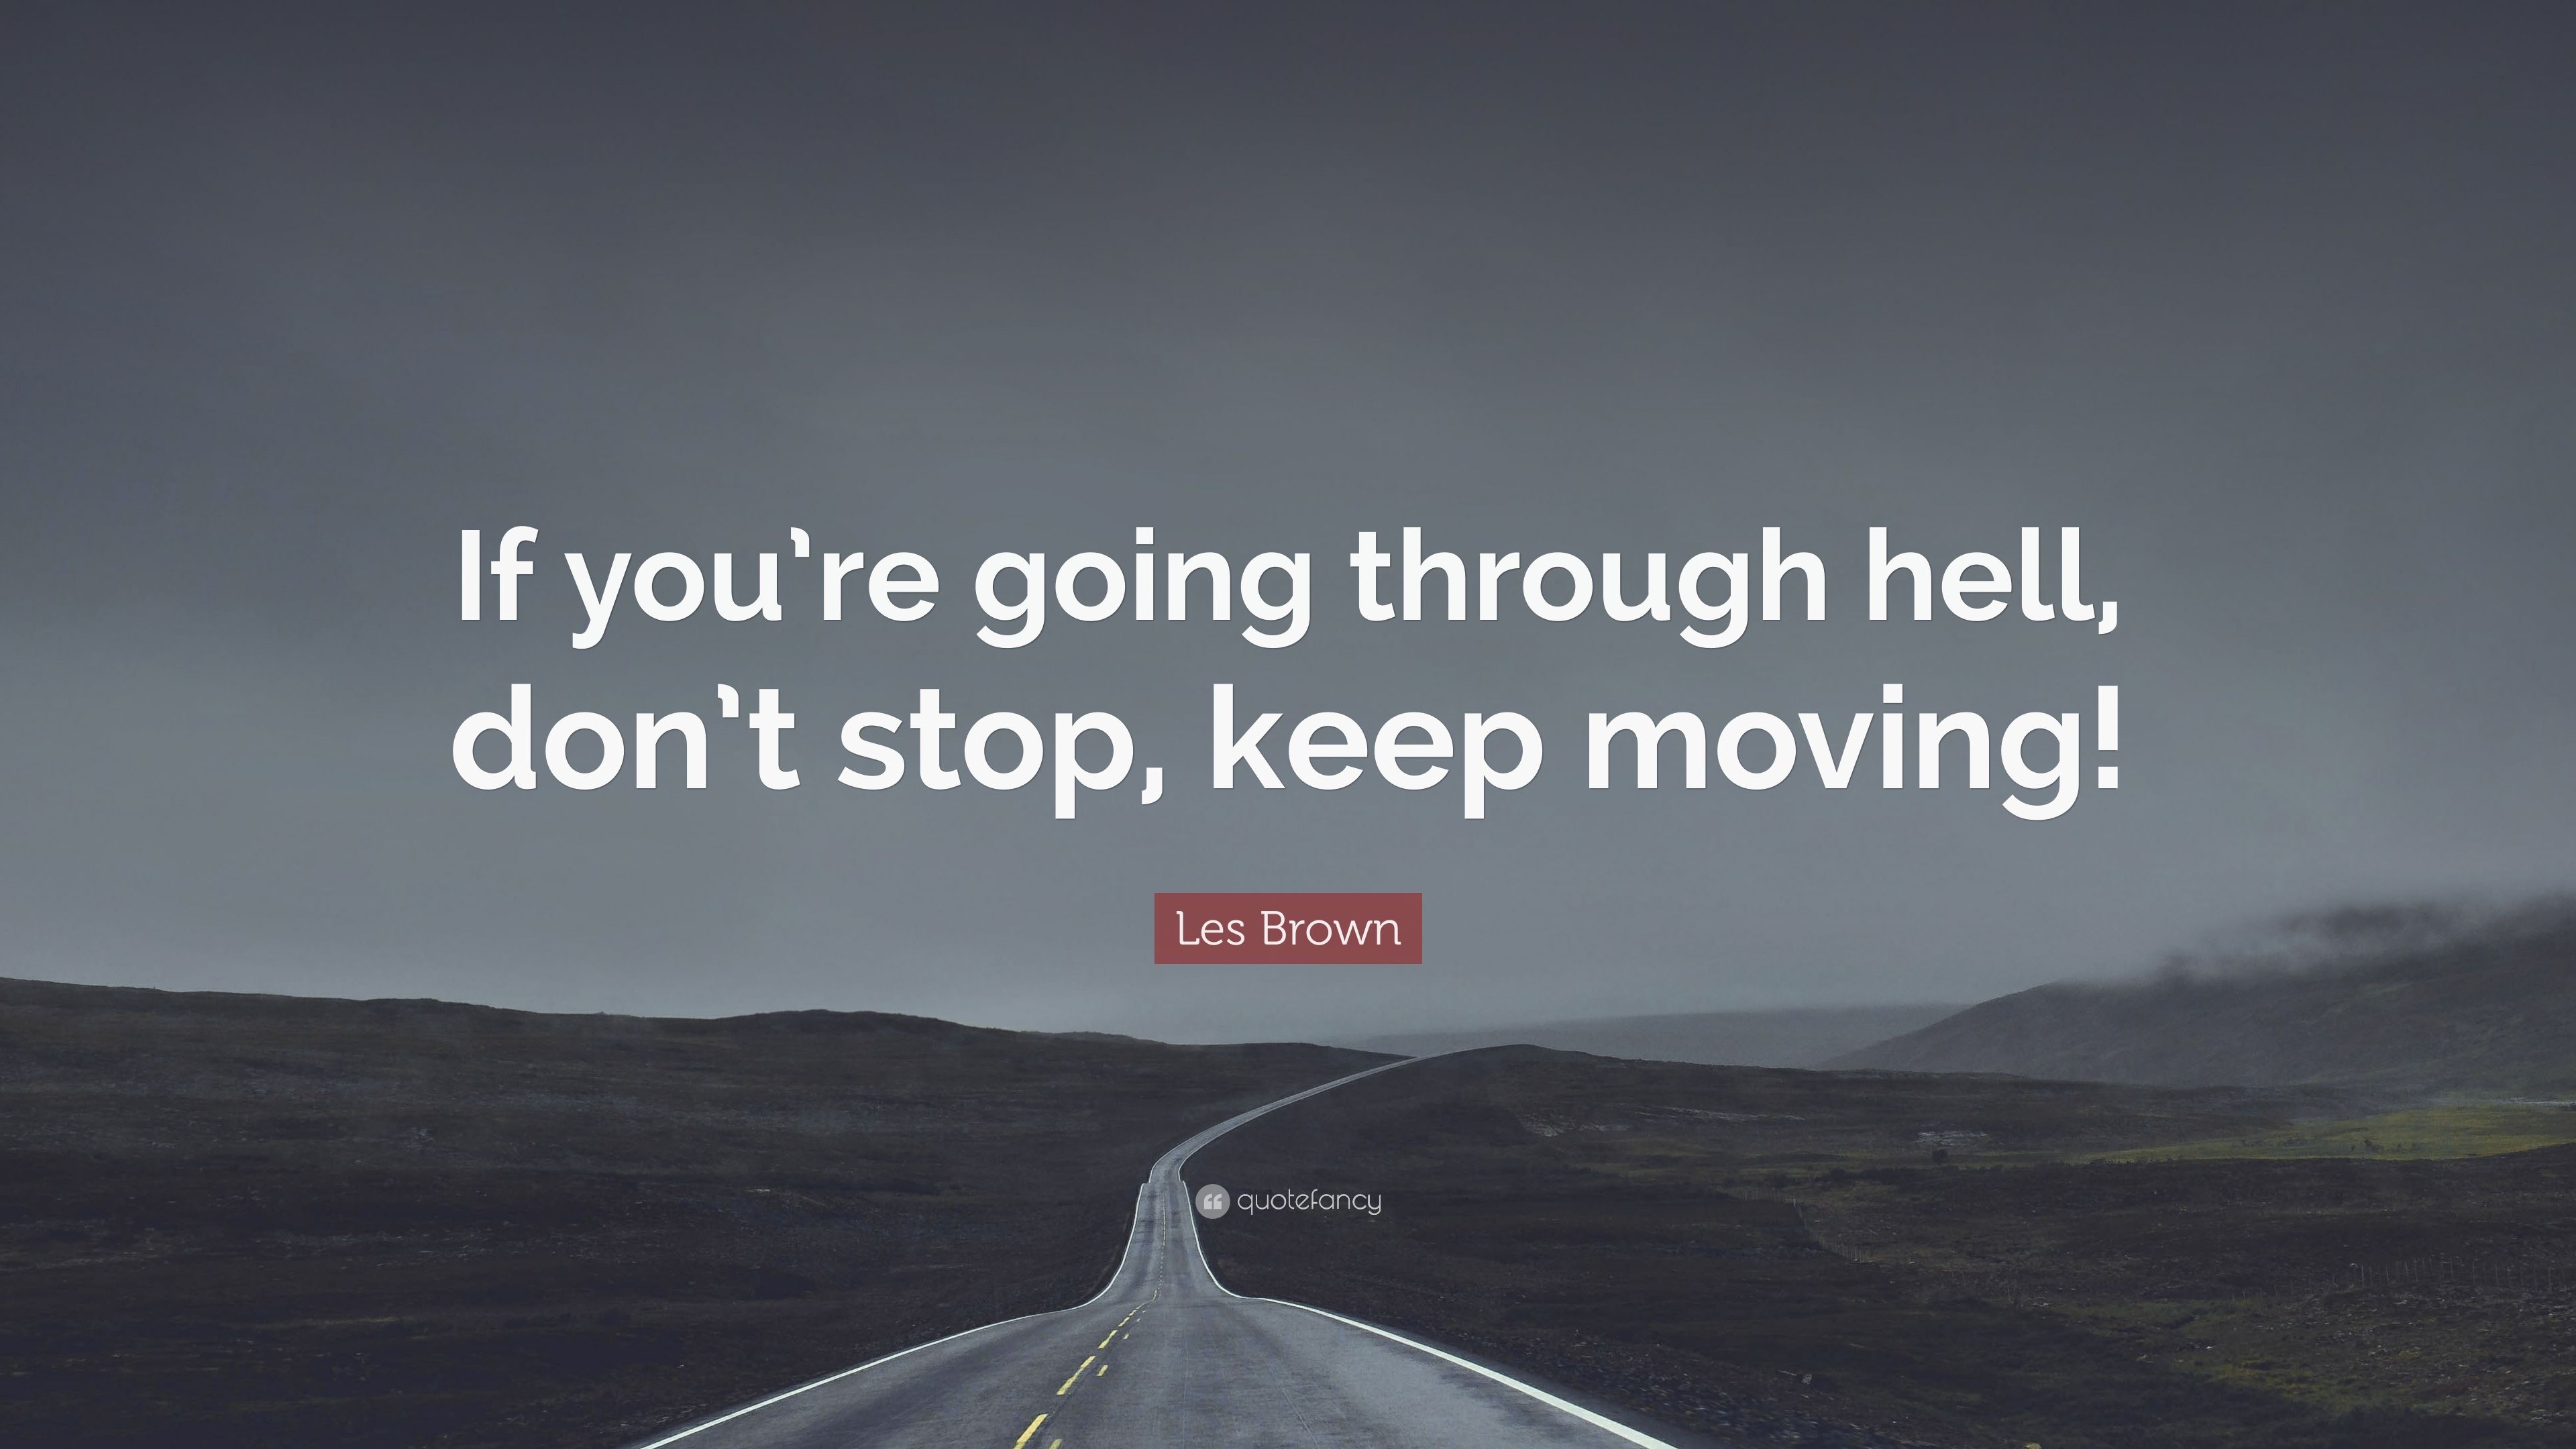 Les Brown Quote: “If you're going through hell, don't stop, keep moving!” (12 wallpaper)